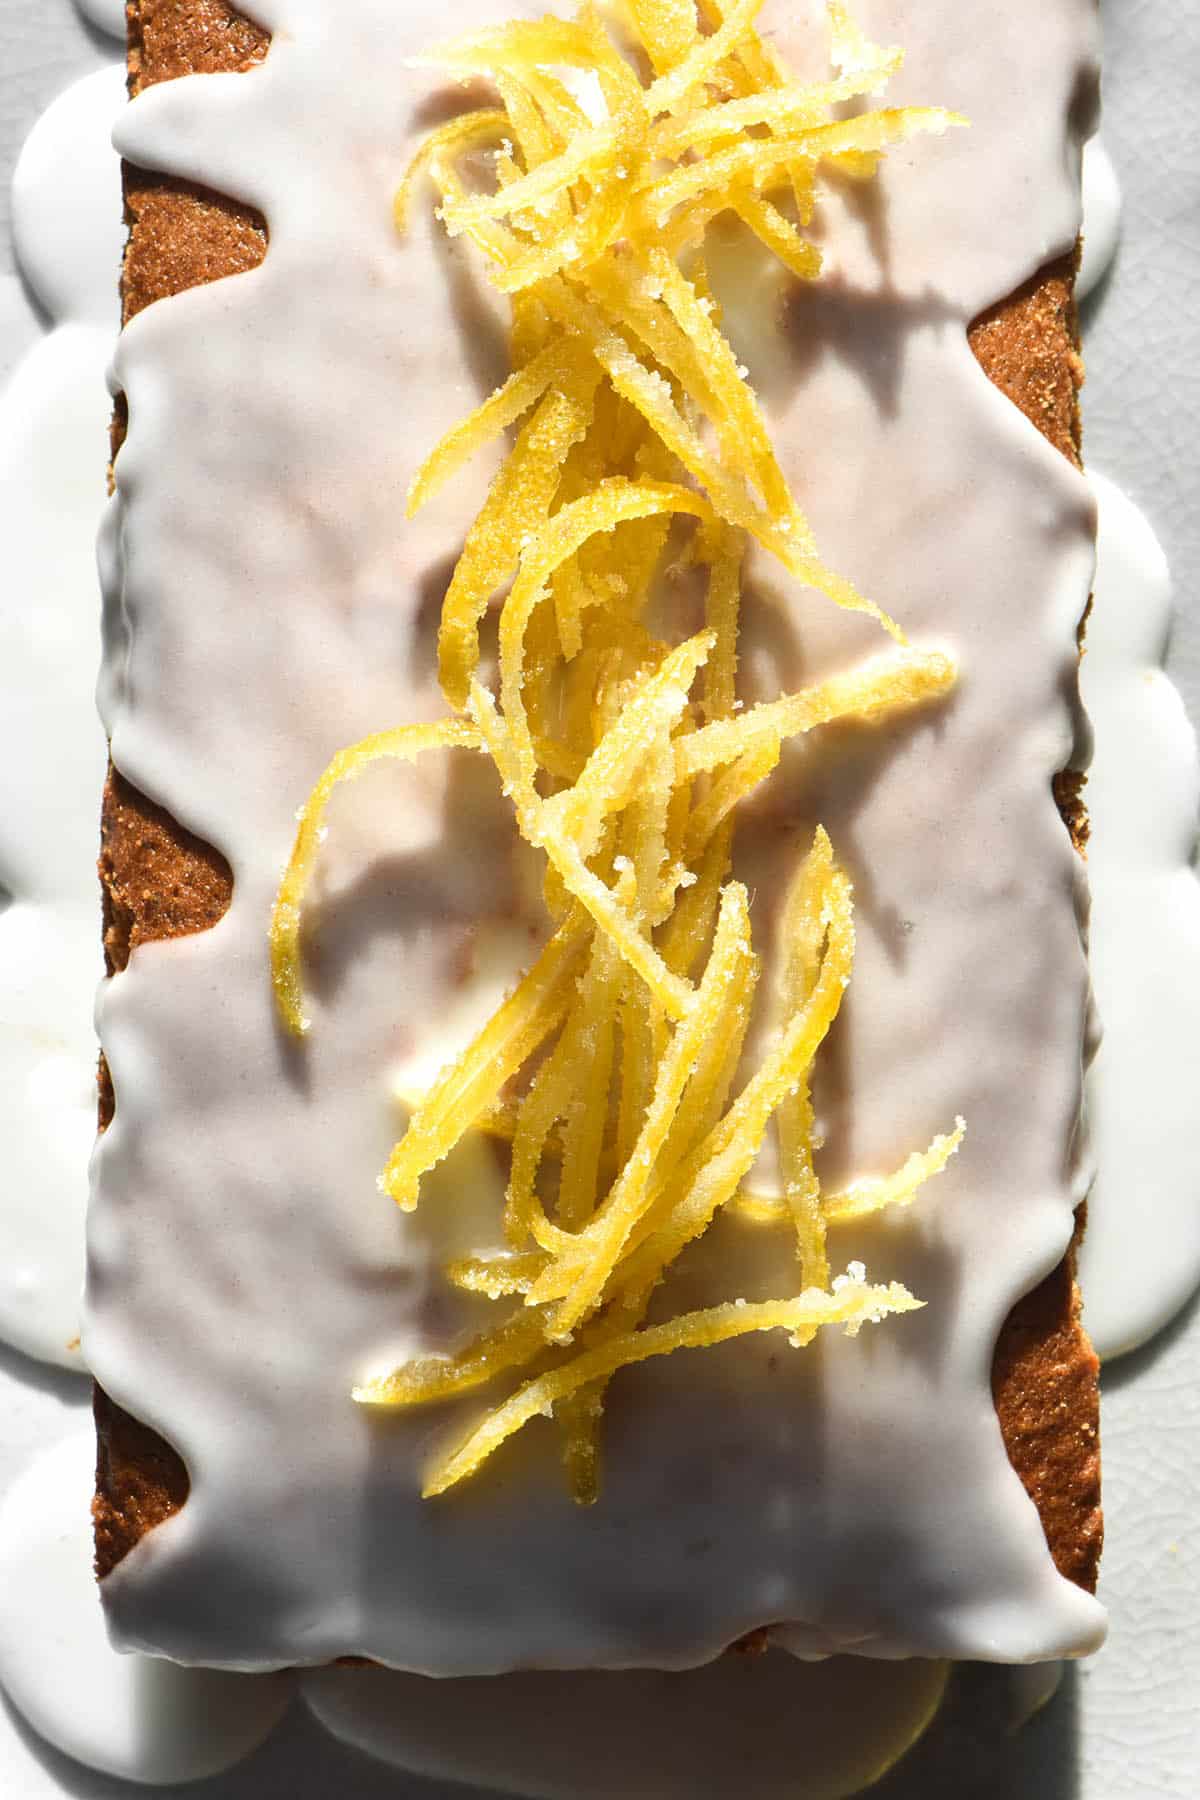 An aerial close up view of a gluten free lemon poppy seed cake topped with an icing drizzle and candied lemon peel slices